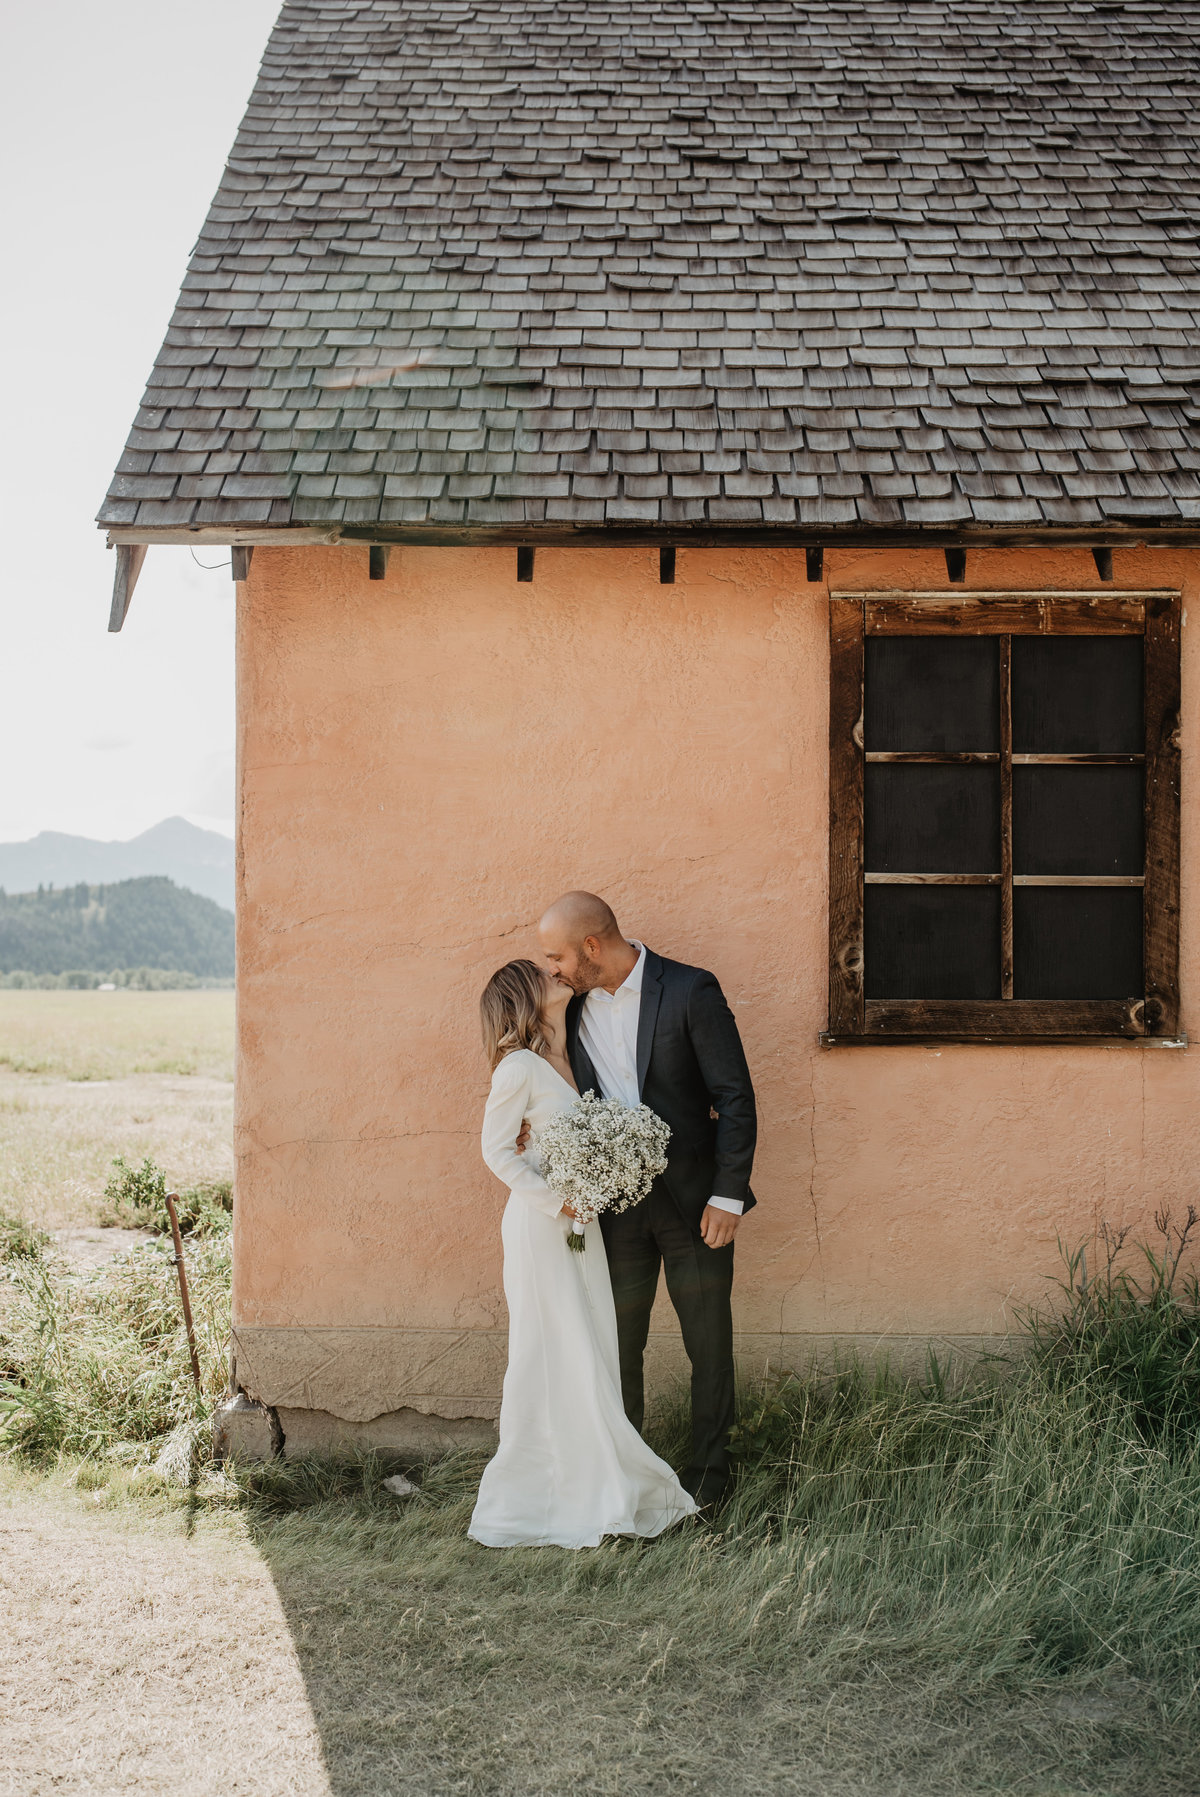 jackson wyoming photographer captures outdoor bridals with Bride and groom in the Tetons to elope, are standing in front of a stucco house with rustic details